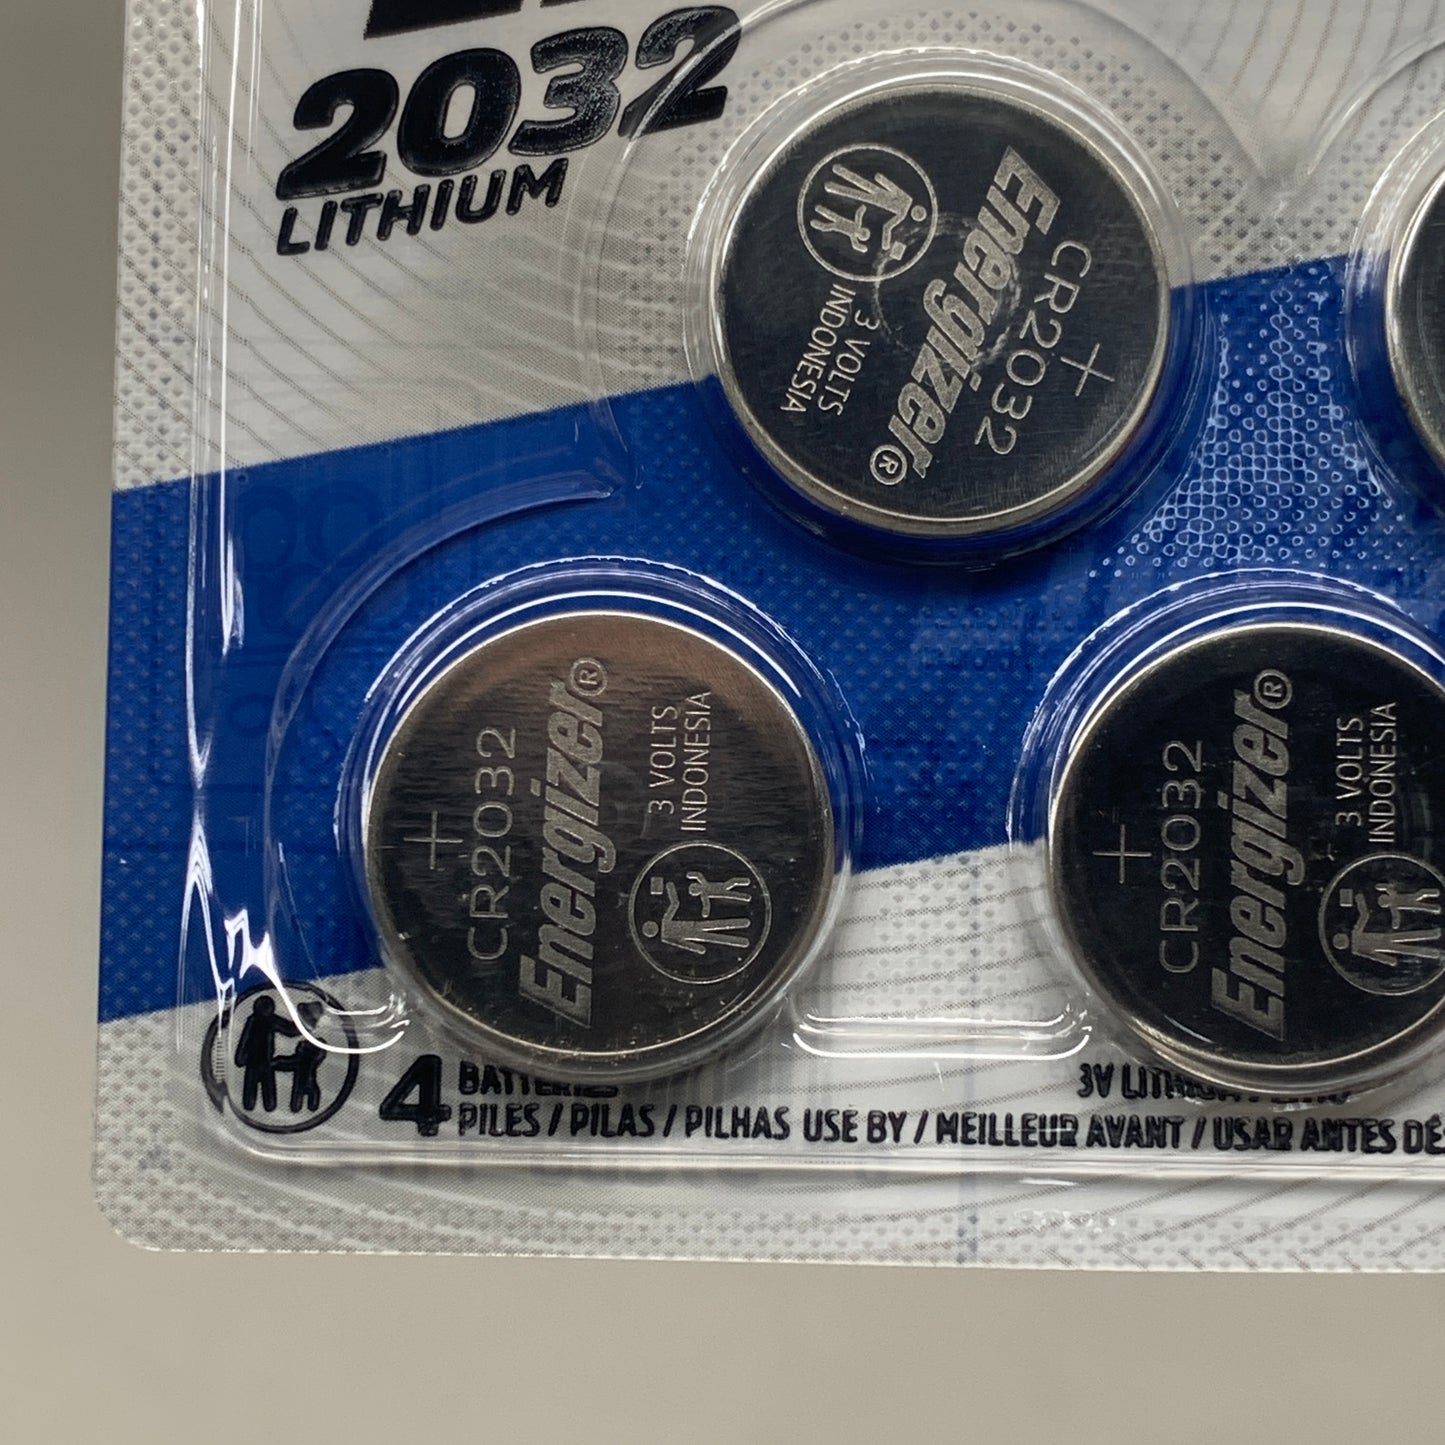 ENERGIZER (8 BATTERIES) 2032 Lithium Coin Battery for Key FOB 851179